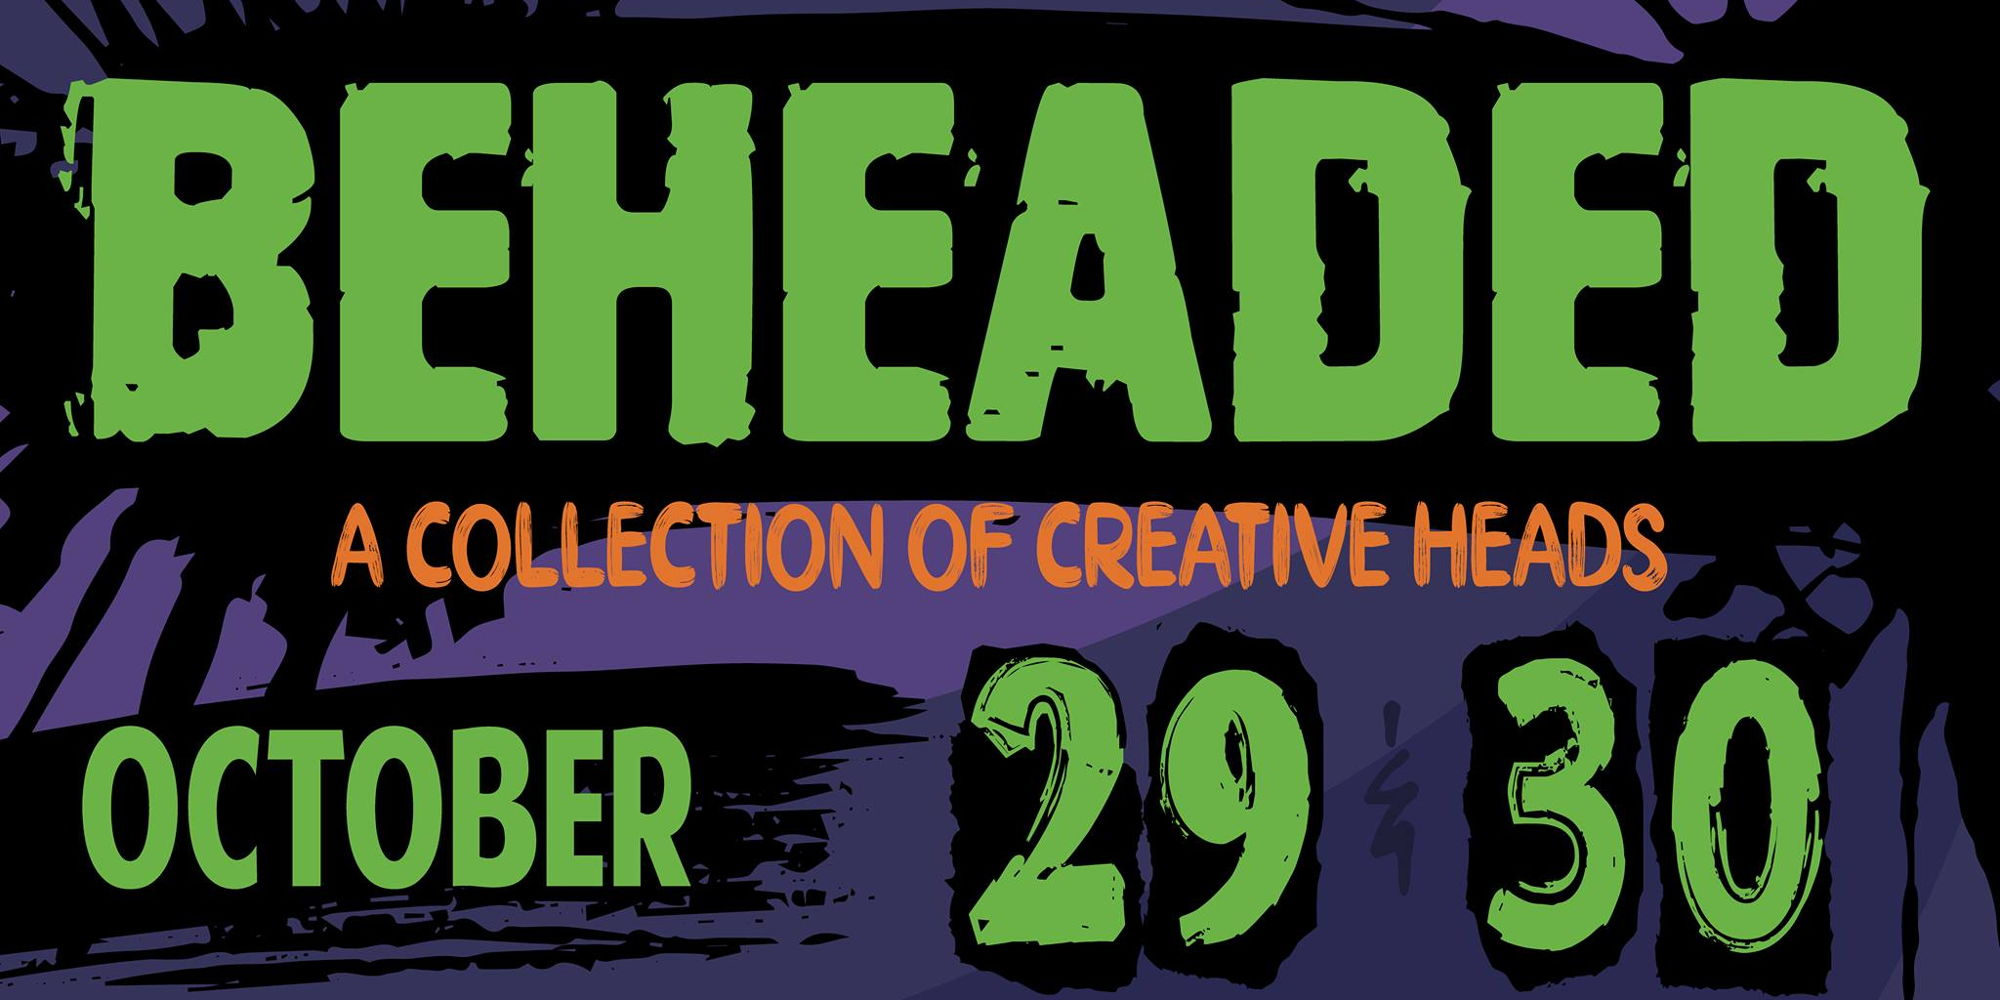 Beheaded | A Collection of Creative Heads promotional image